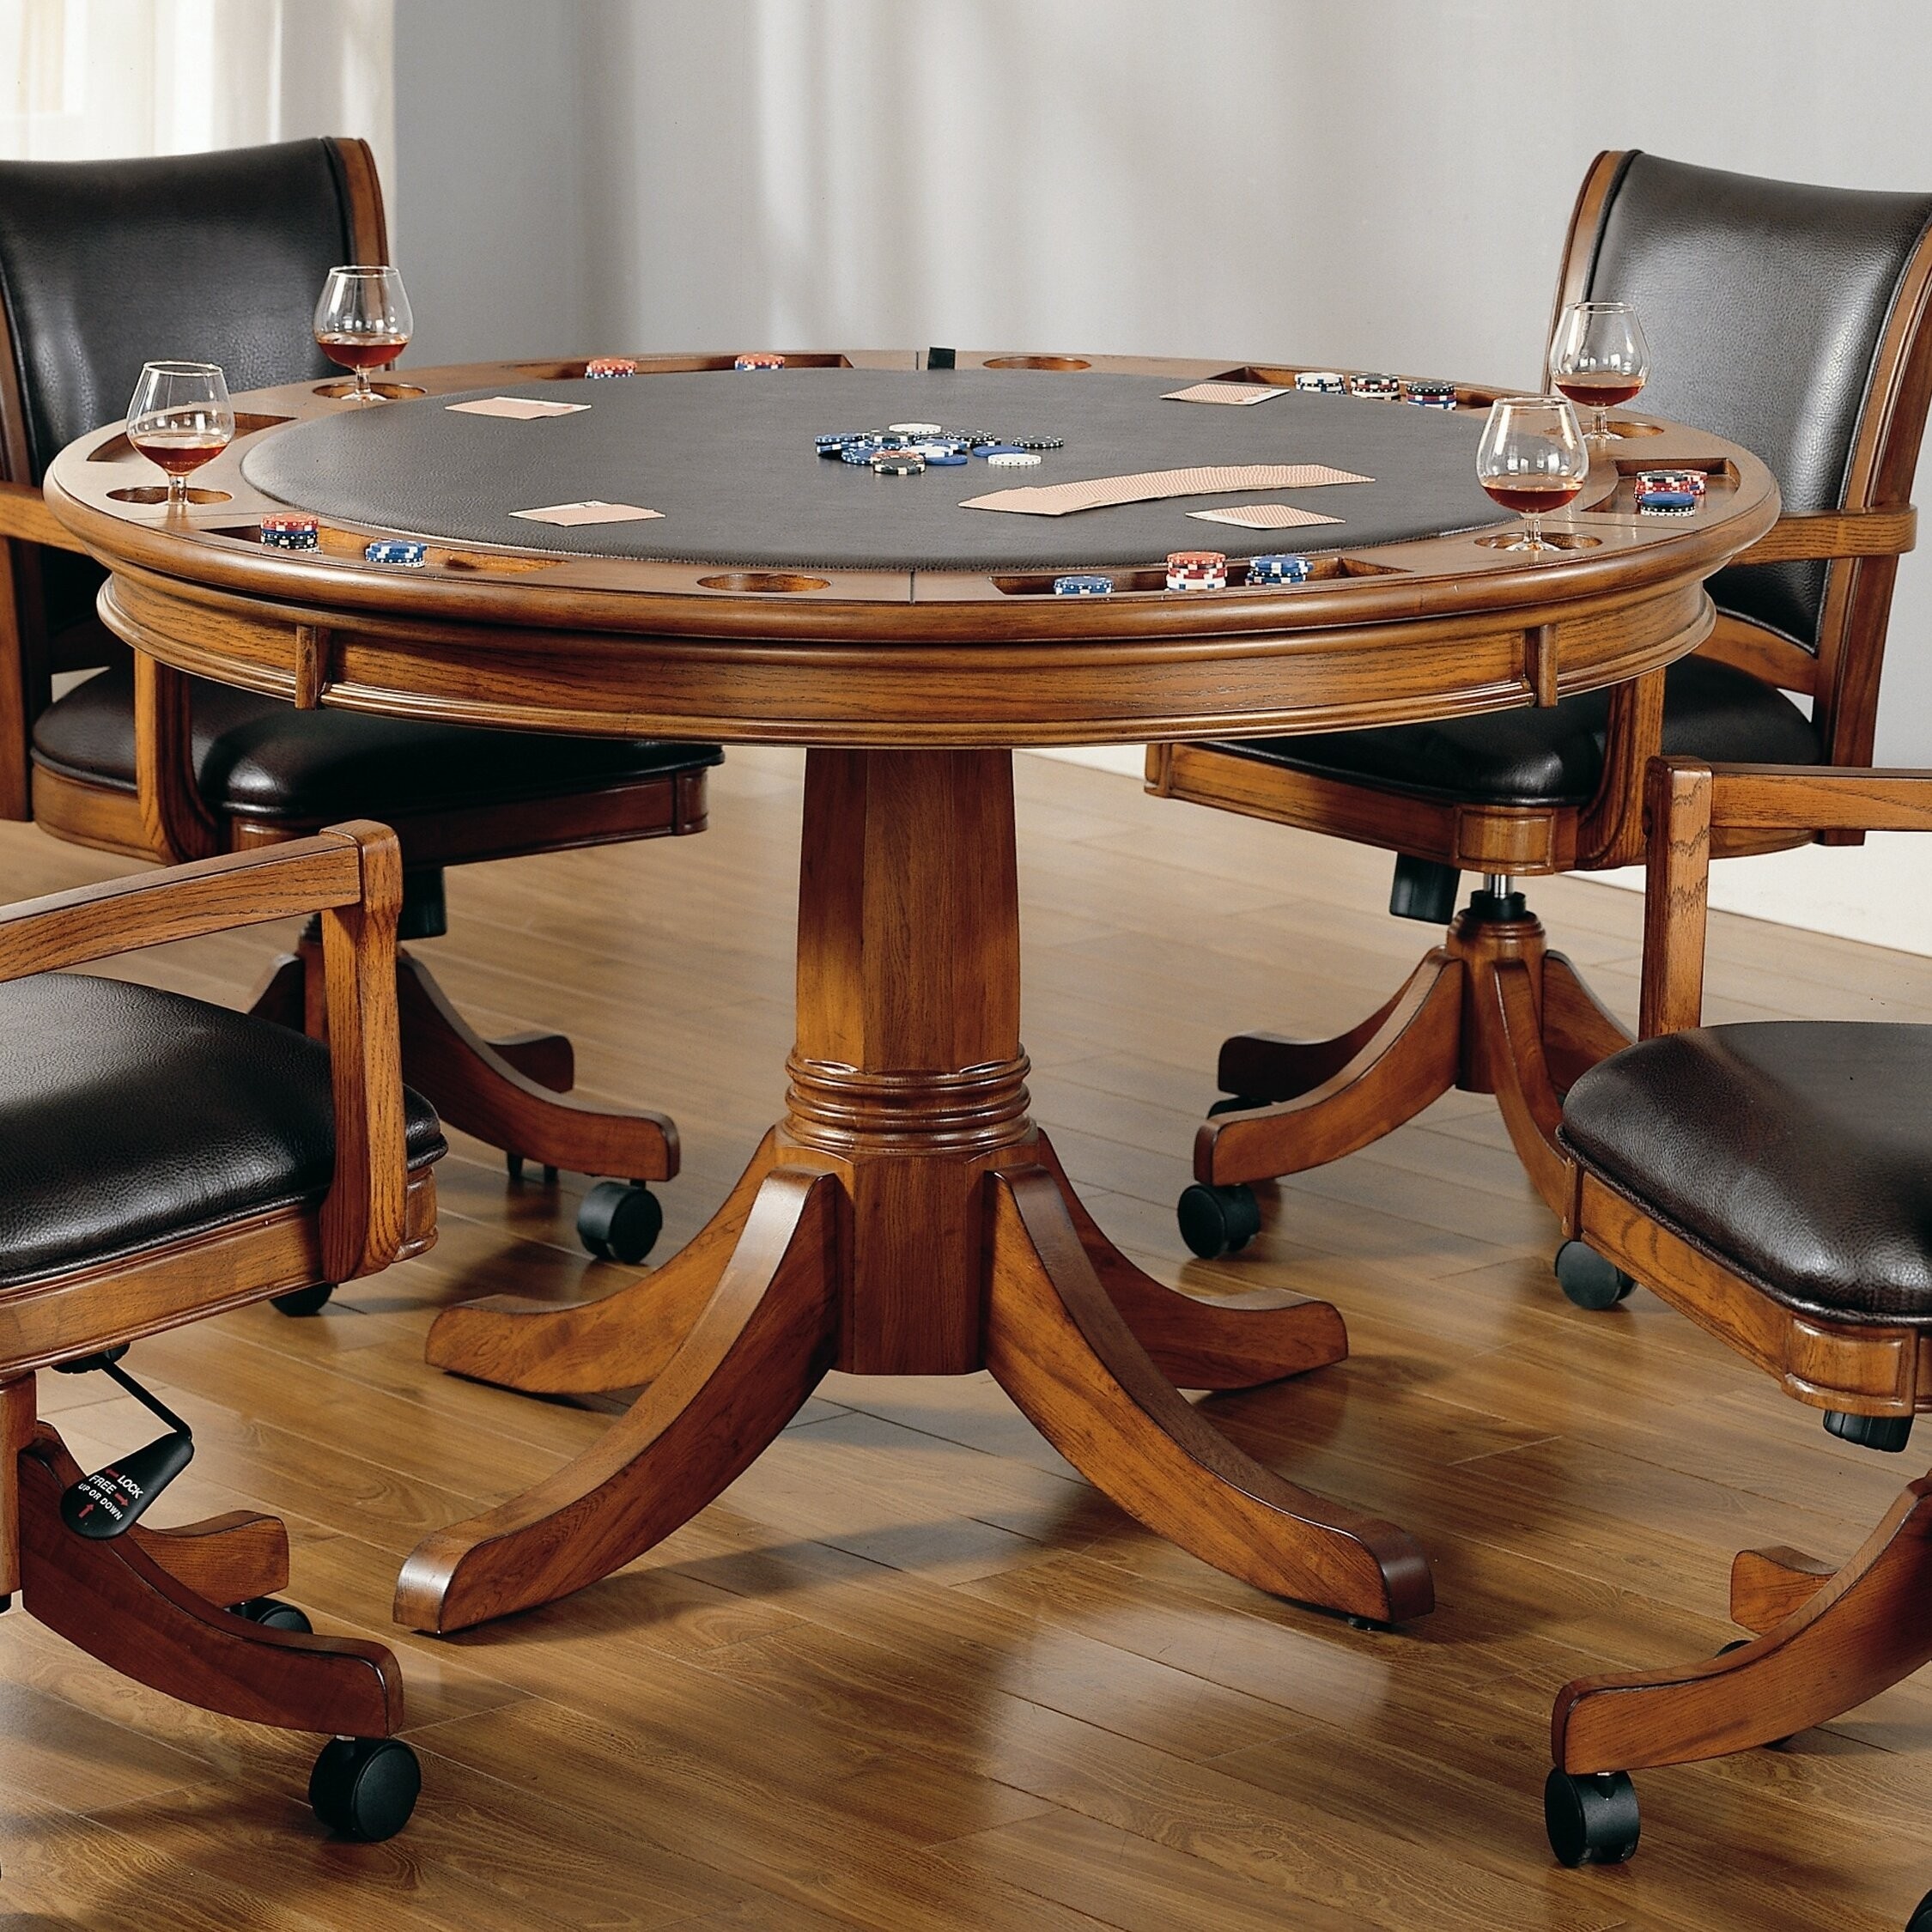 52" Park View Poker Table